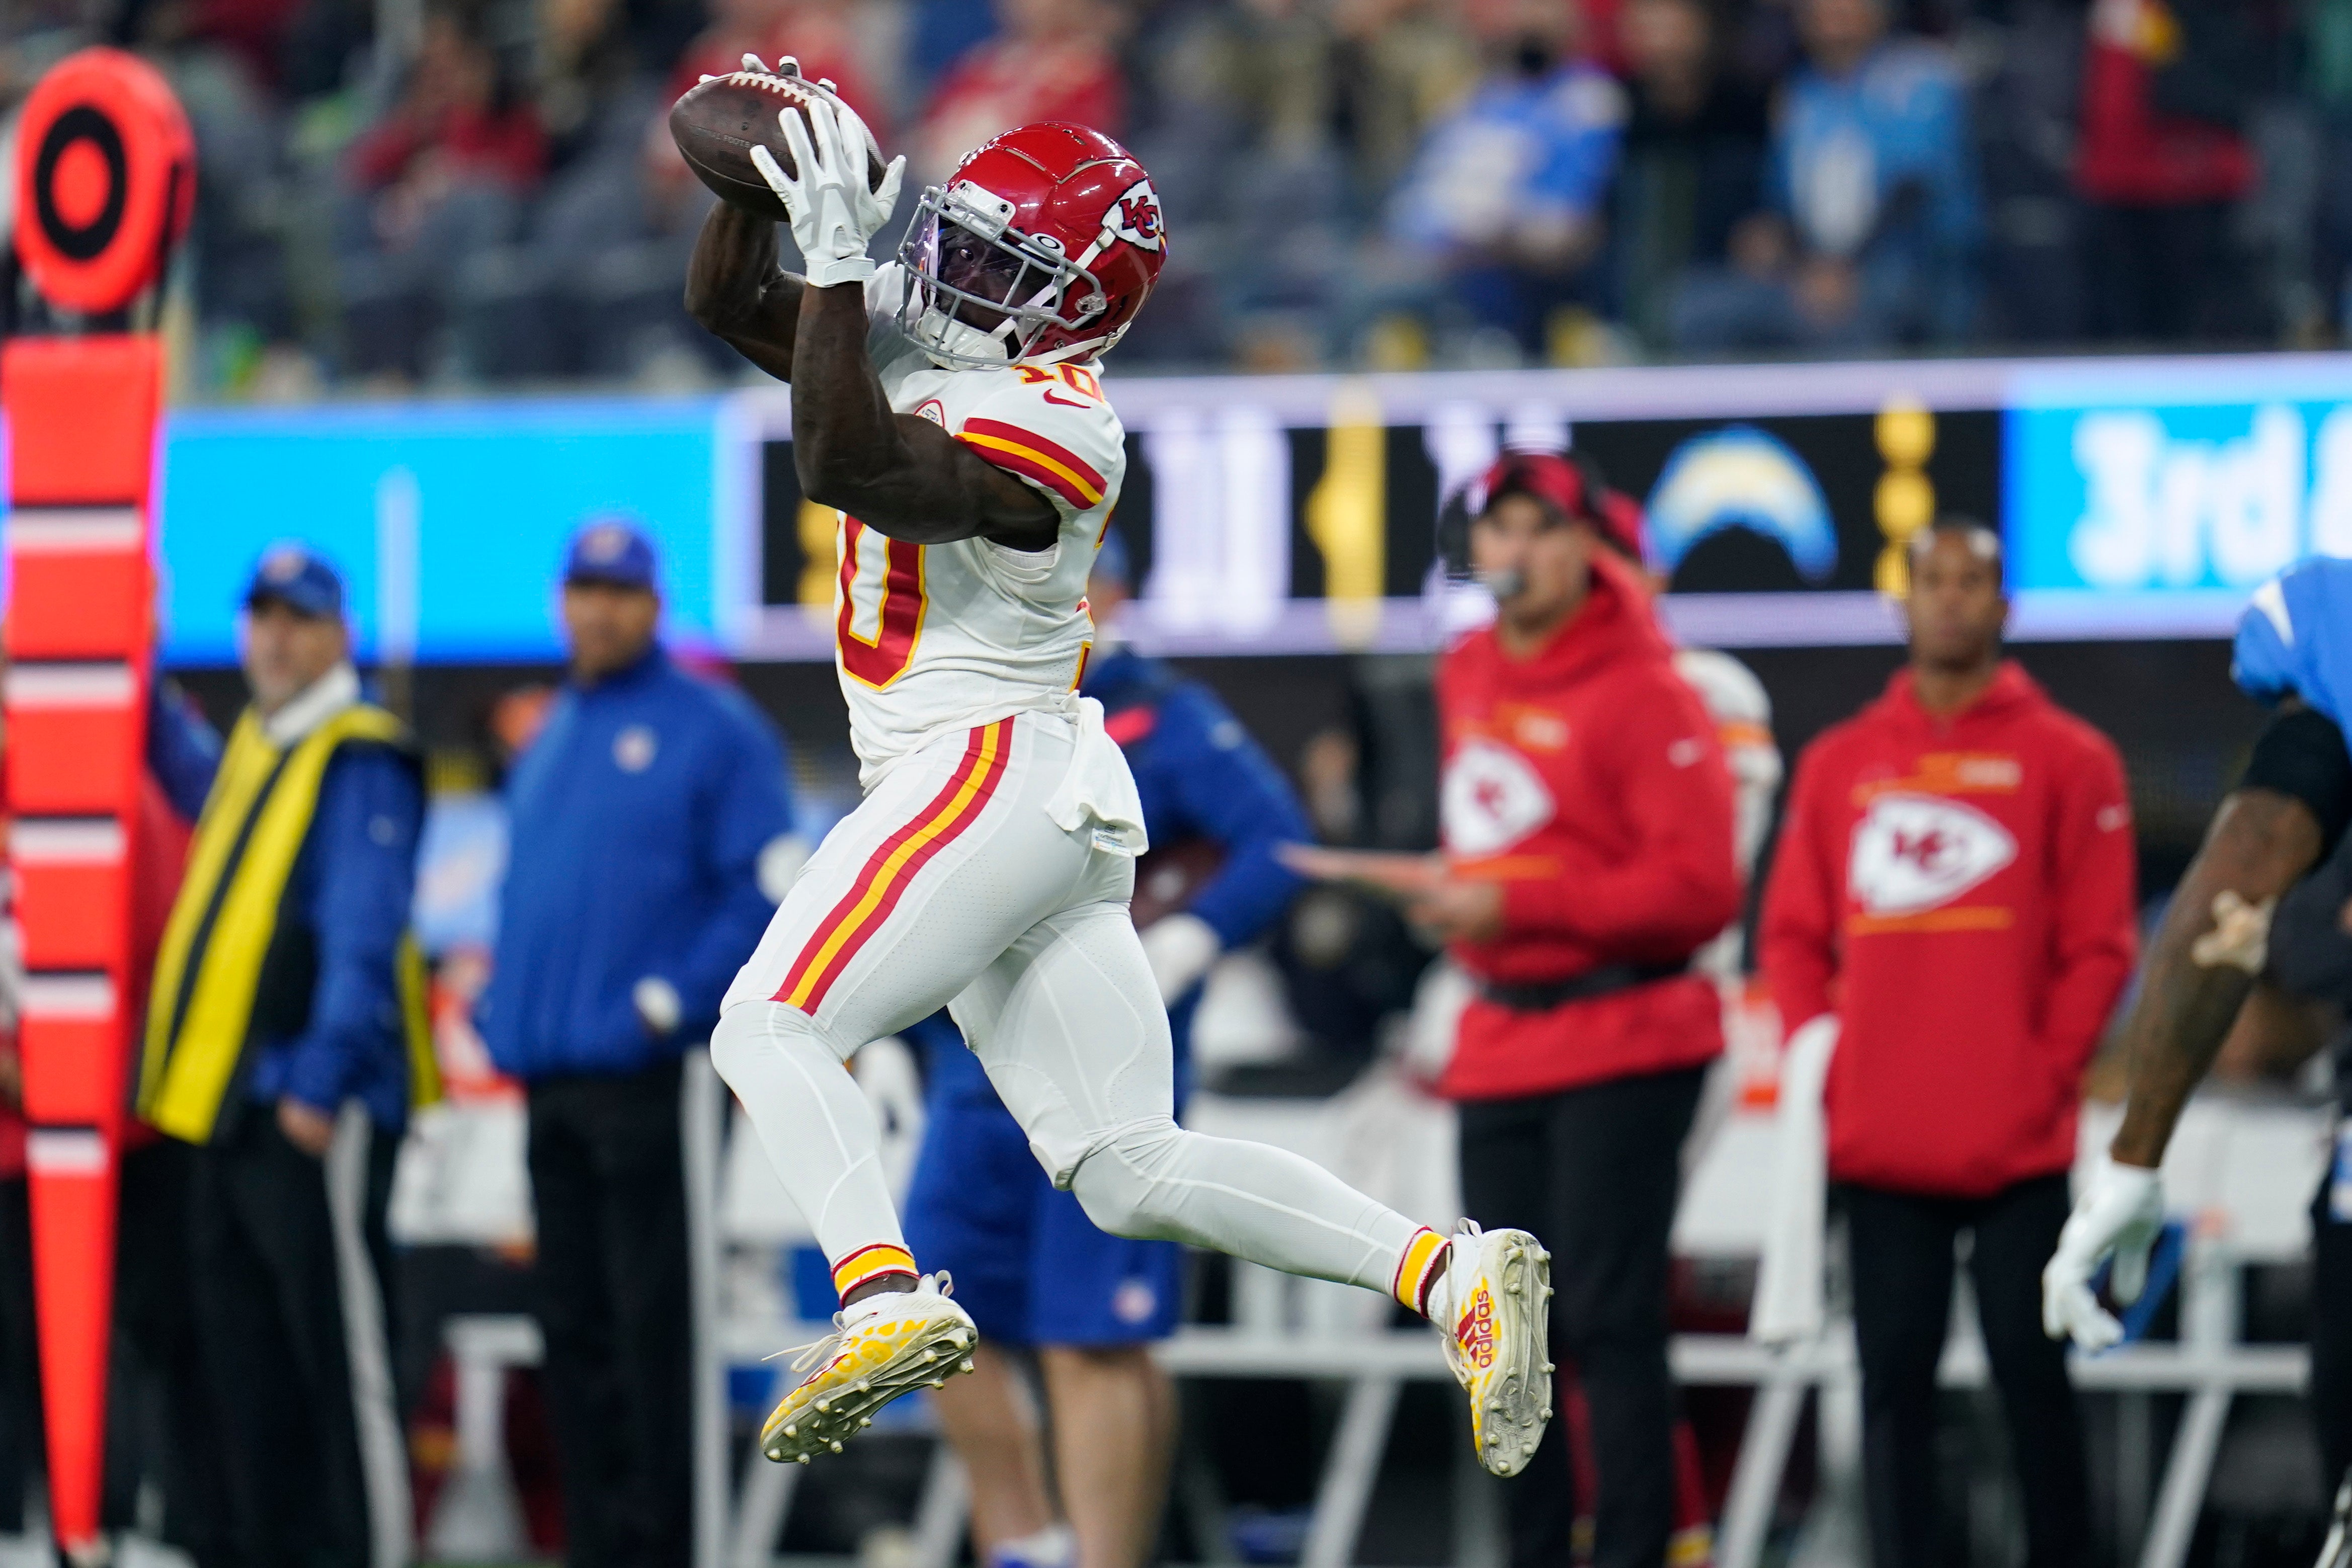 Kelce's OT touchdown gives Chiefs 34-28 win over Chargers